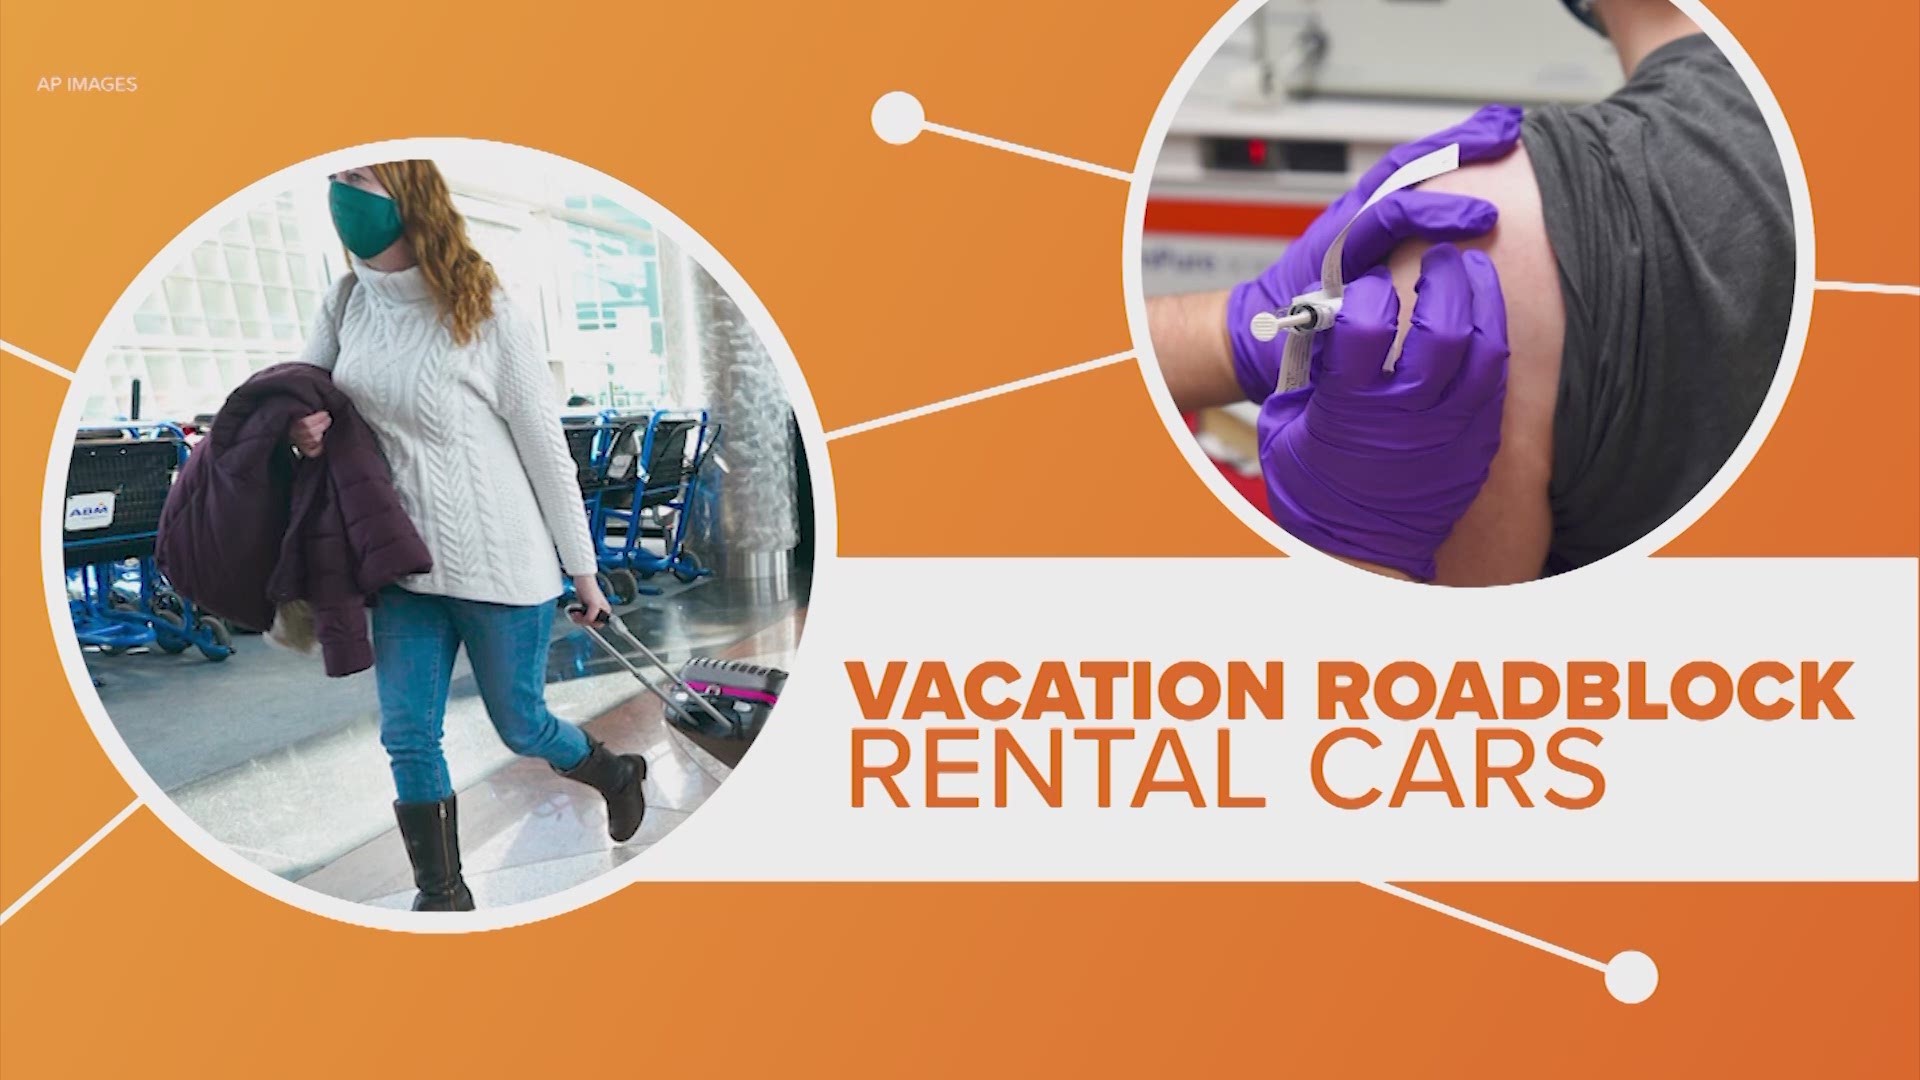 Here's why your rental car may cost more than your plane ticket on your next vacation.